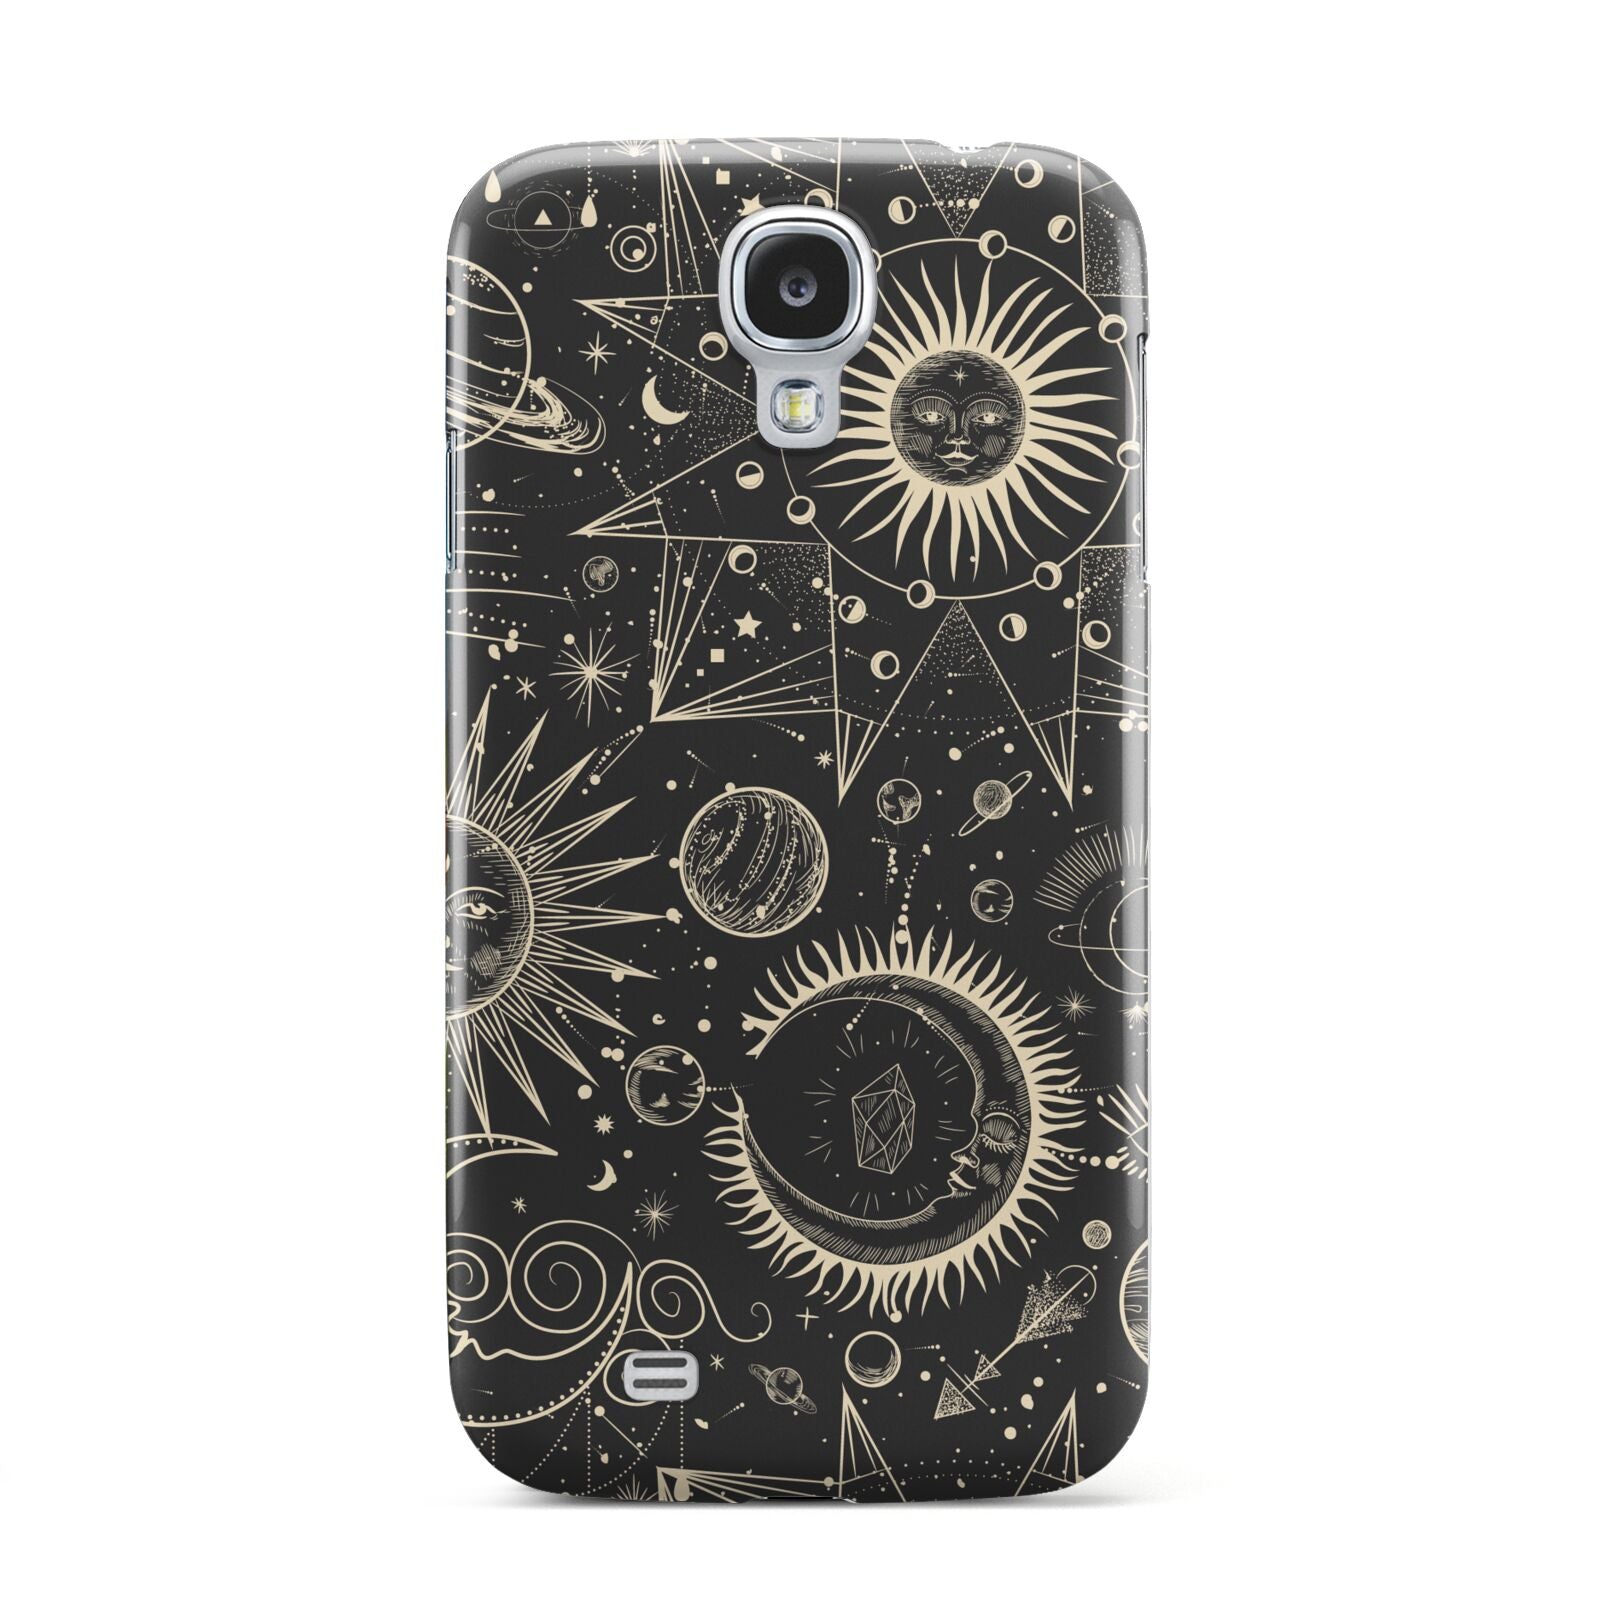 Moon Phases Samsung Galaxy S4 Case